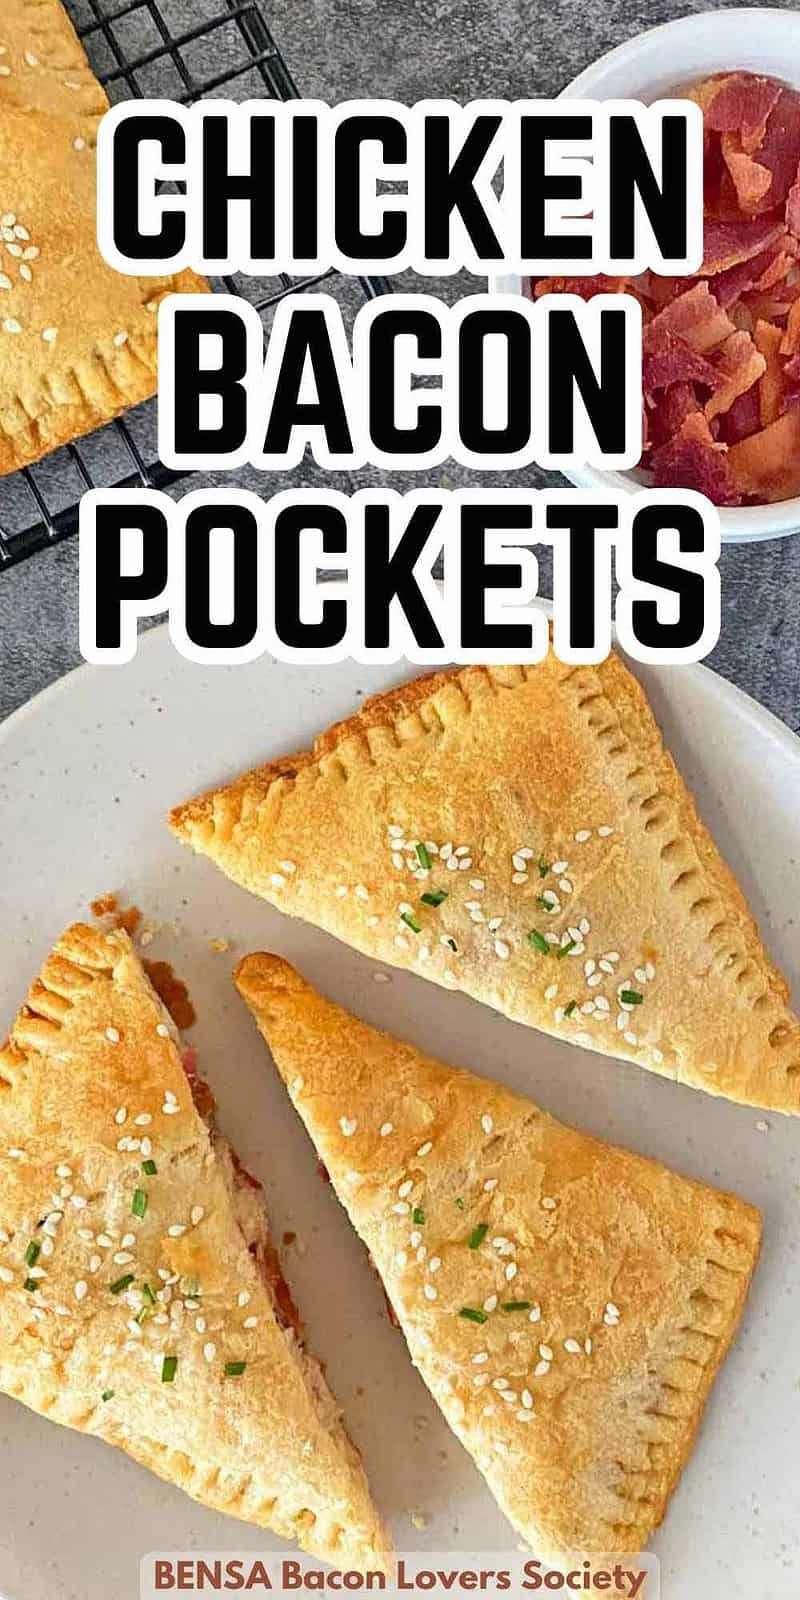 3 pieces of chicken bacon pockets on a serving plate with a small dish of bacon bits.